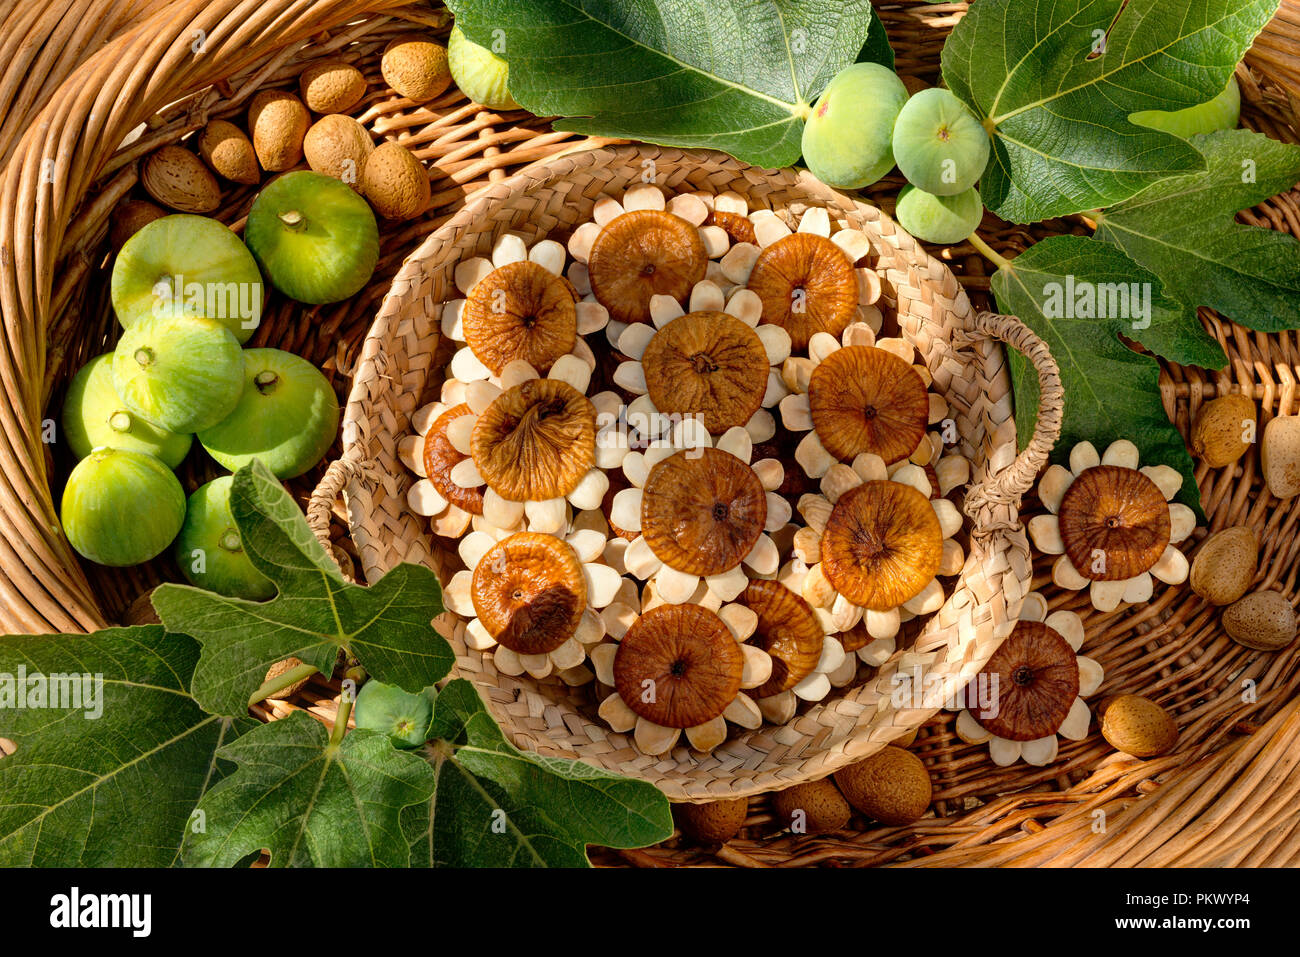 fig estrelas, an Algarve delicacy made with dried figs and almonds, and fresh figs Stock Photo